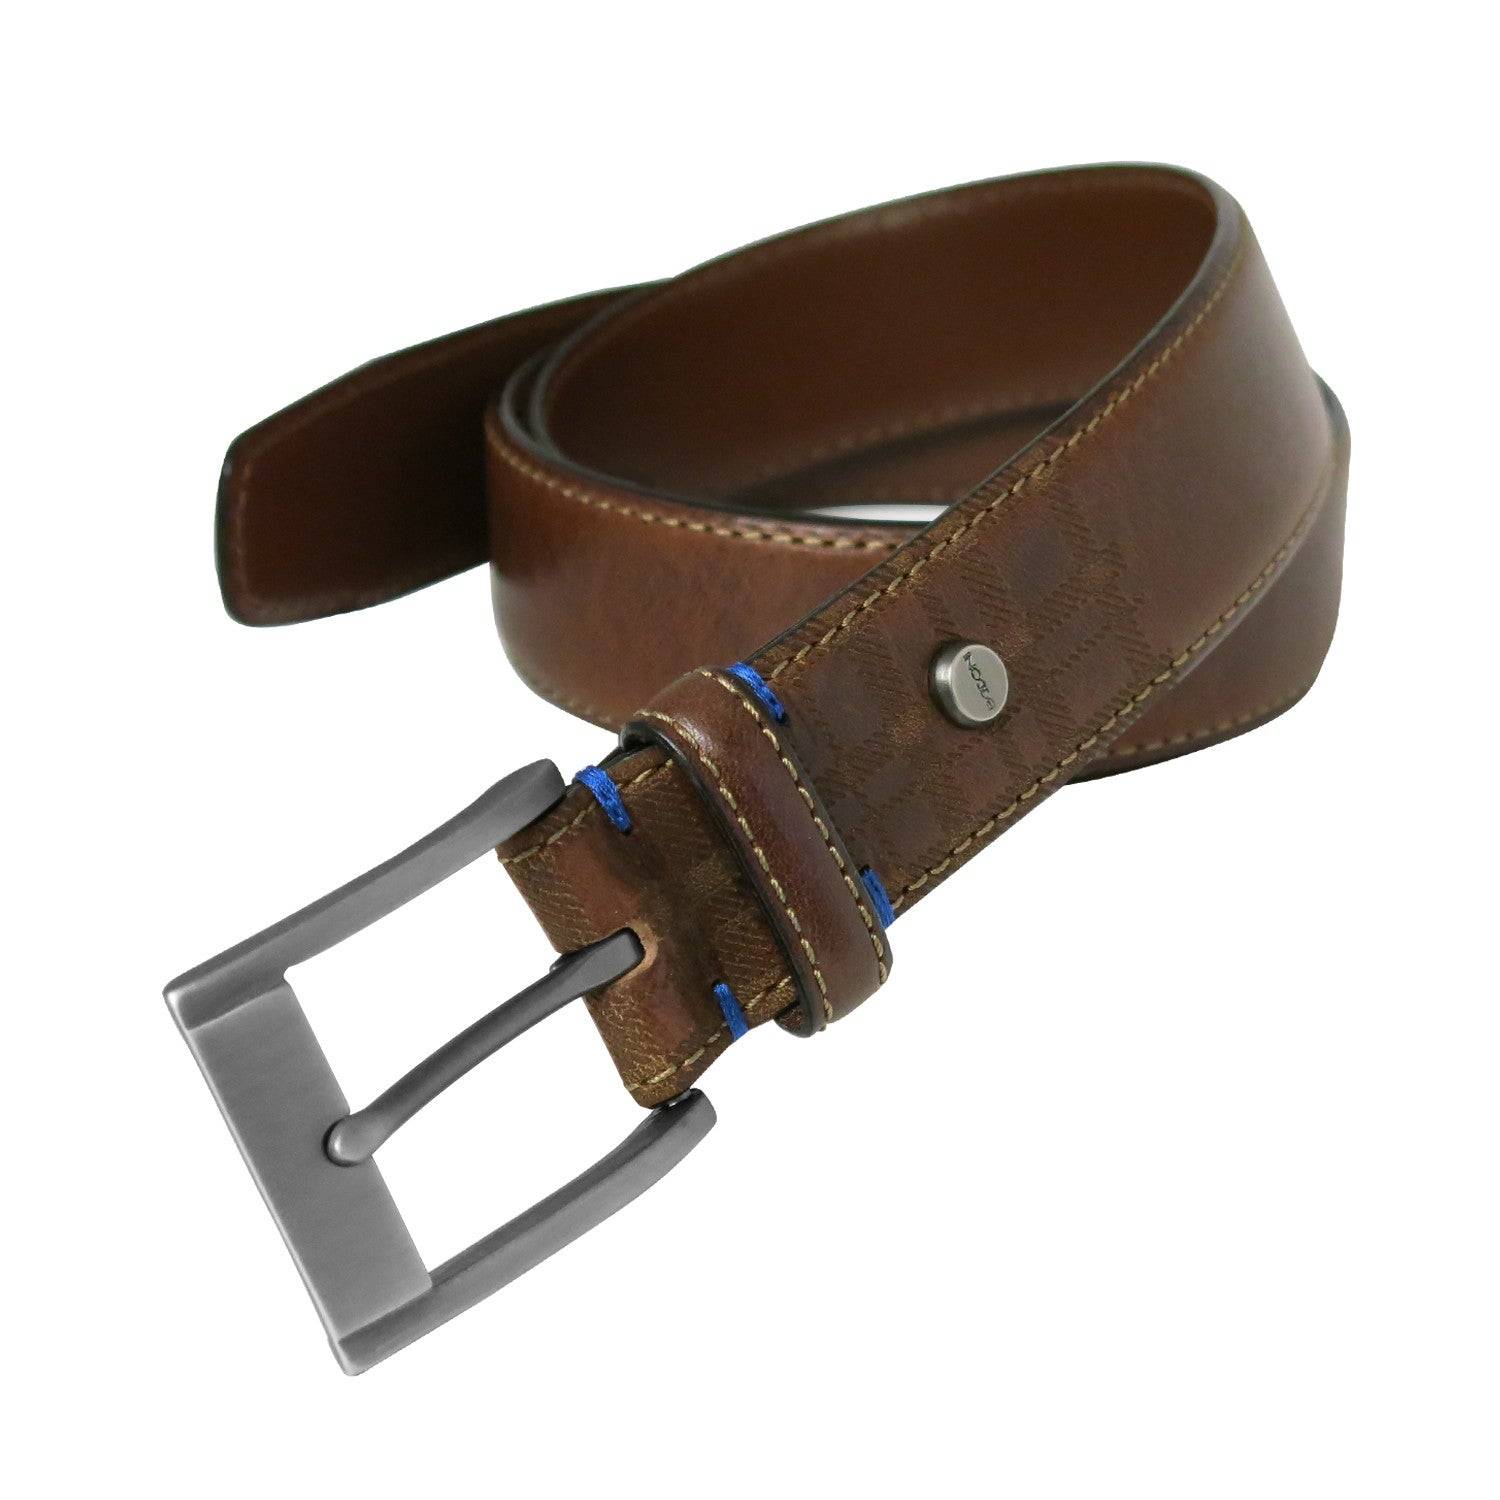 a brown leather belt with a metal buckle